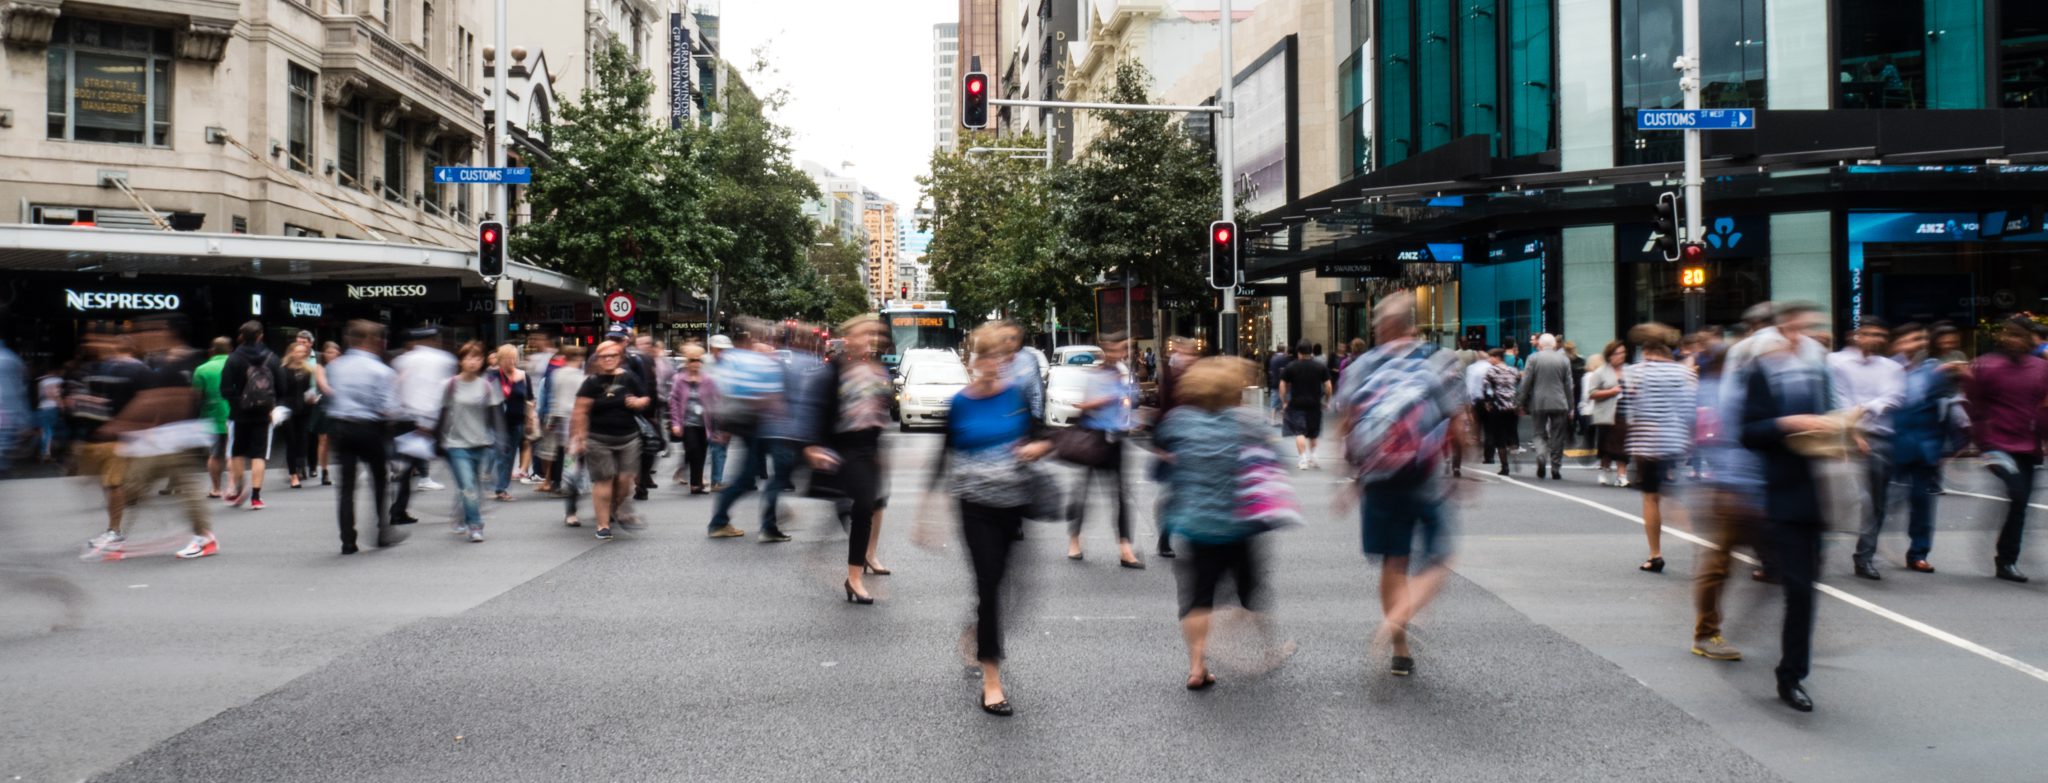 pedestrians crossing an intersection in Auckland